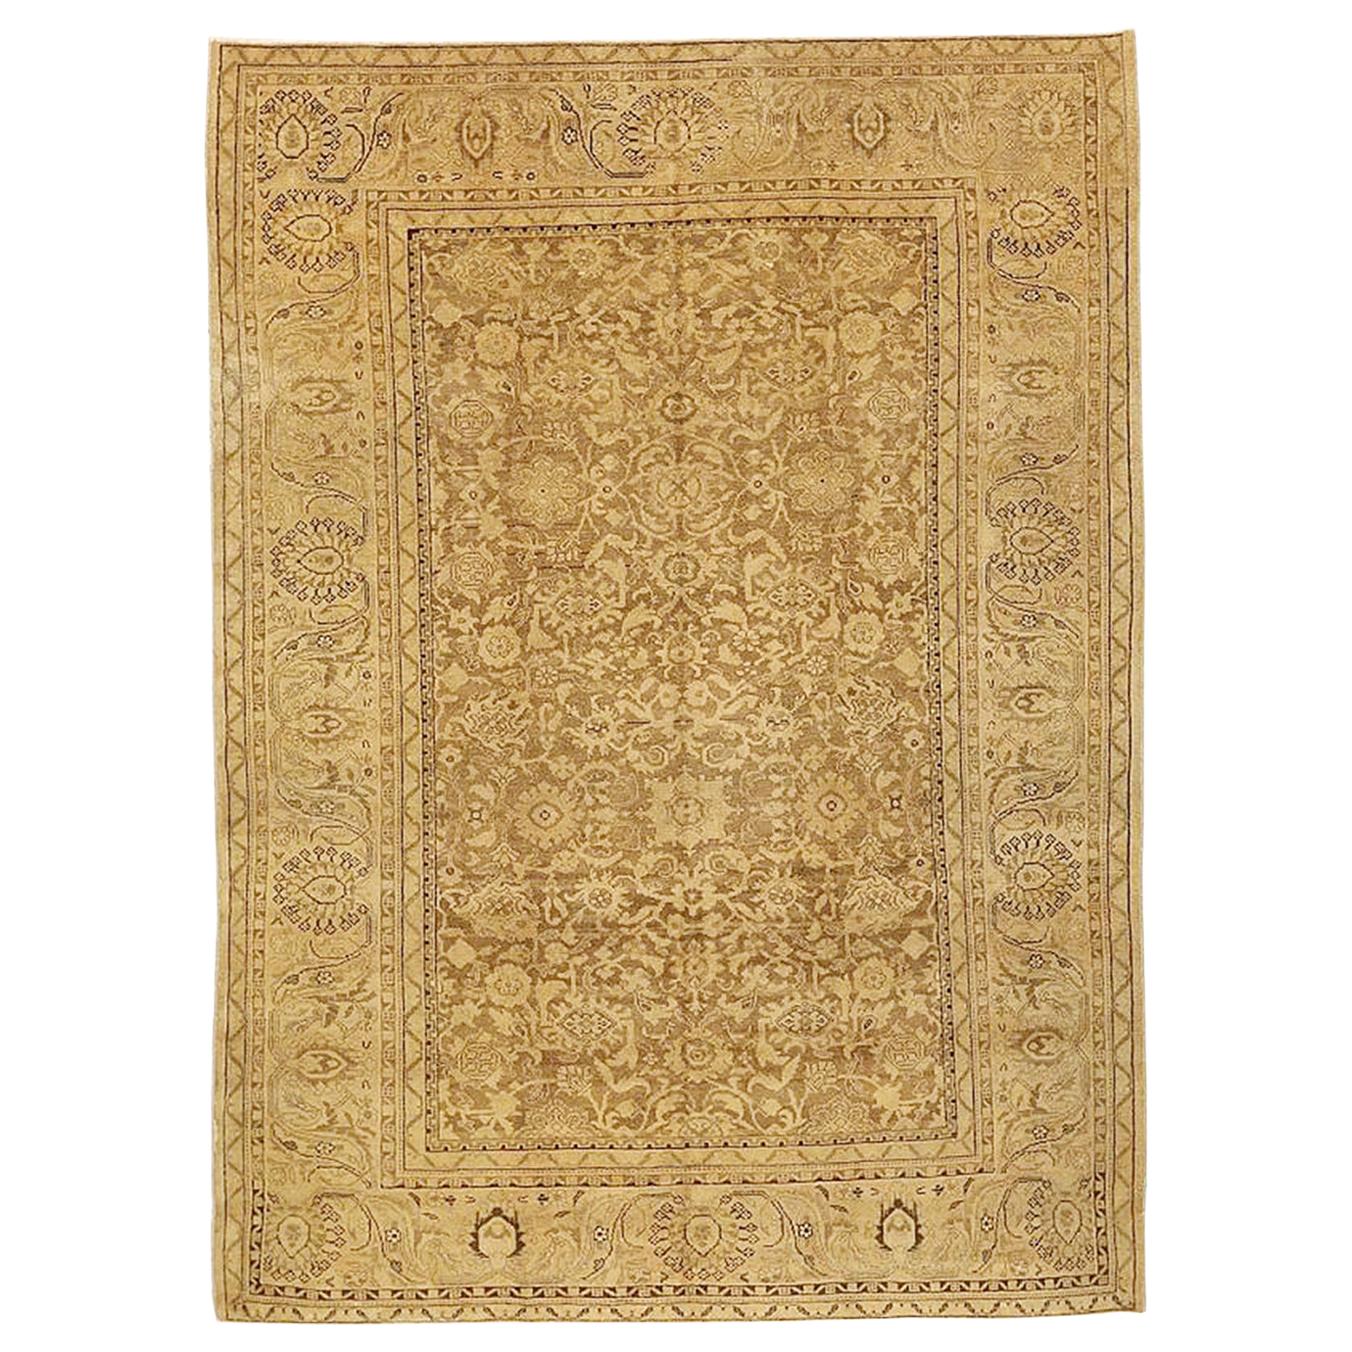 Antique Persian Malayer Rug with Beige and Brown Geometric Patterns